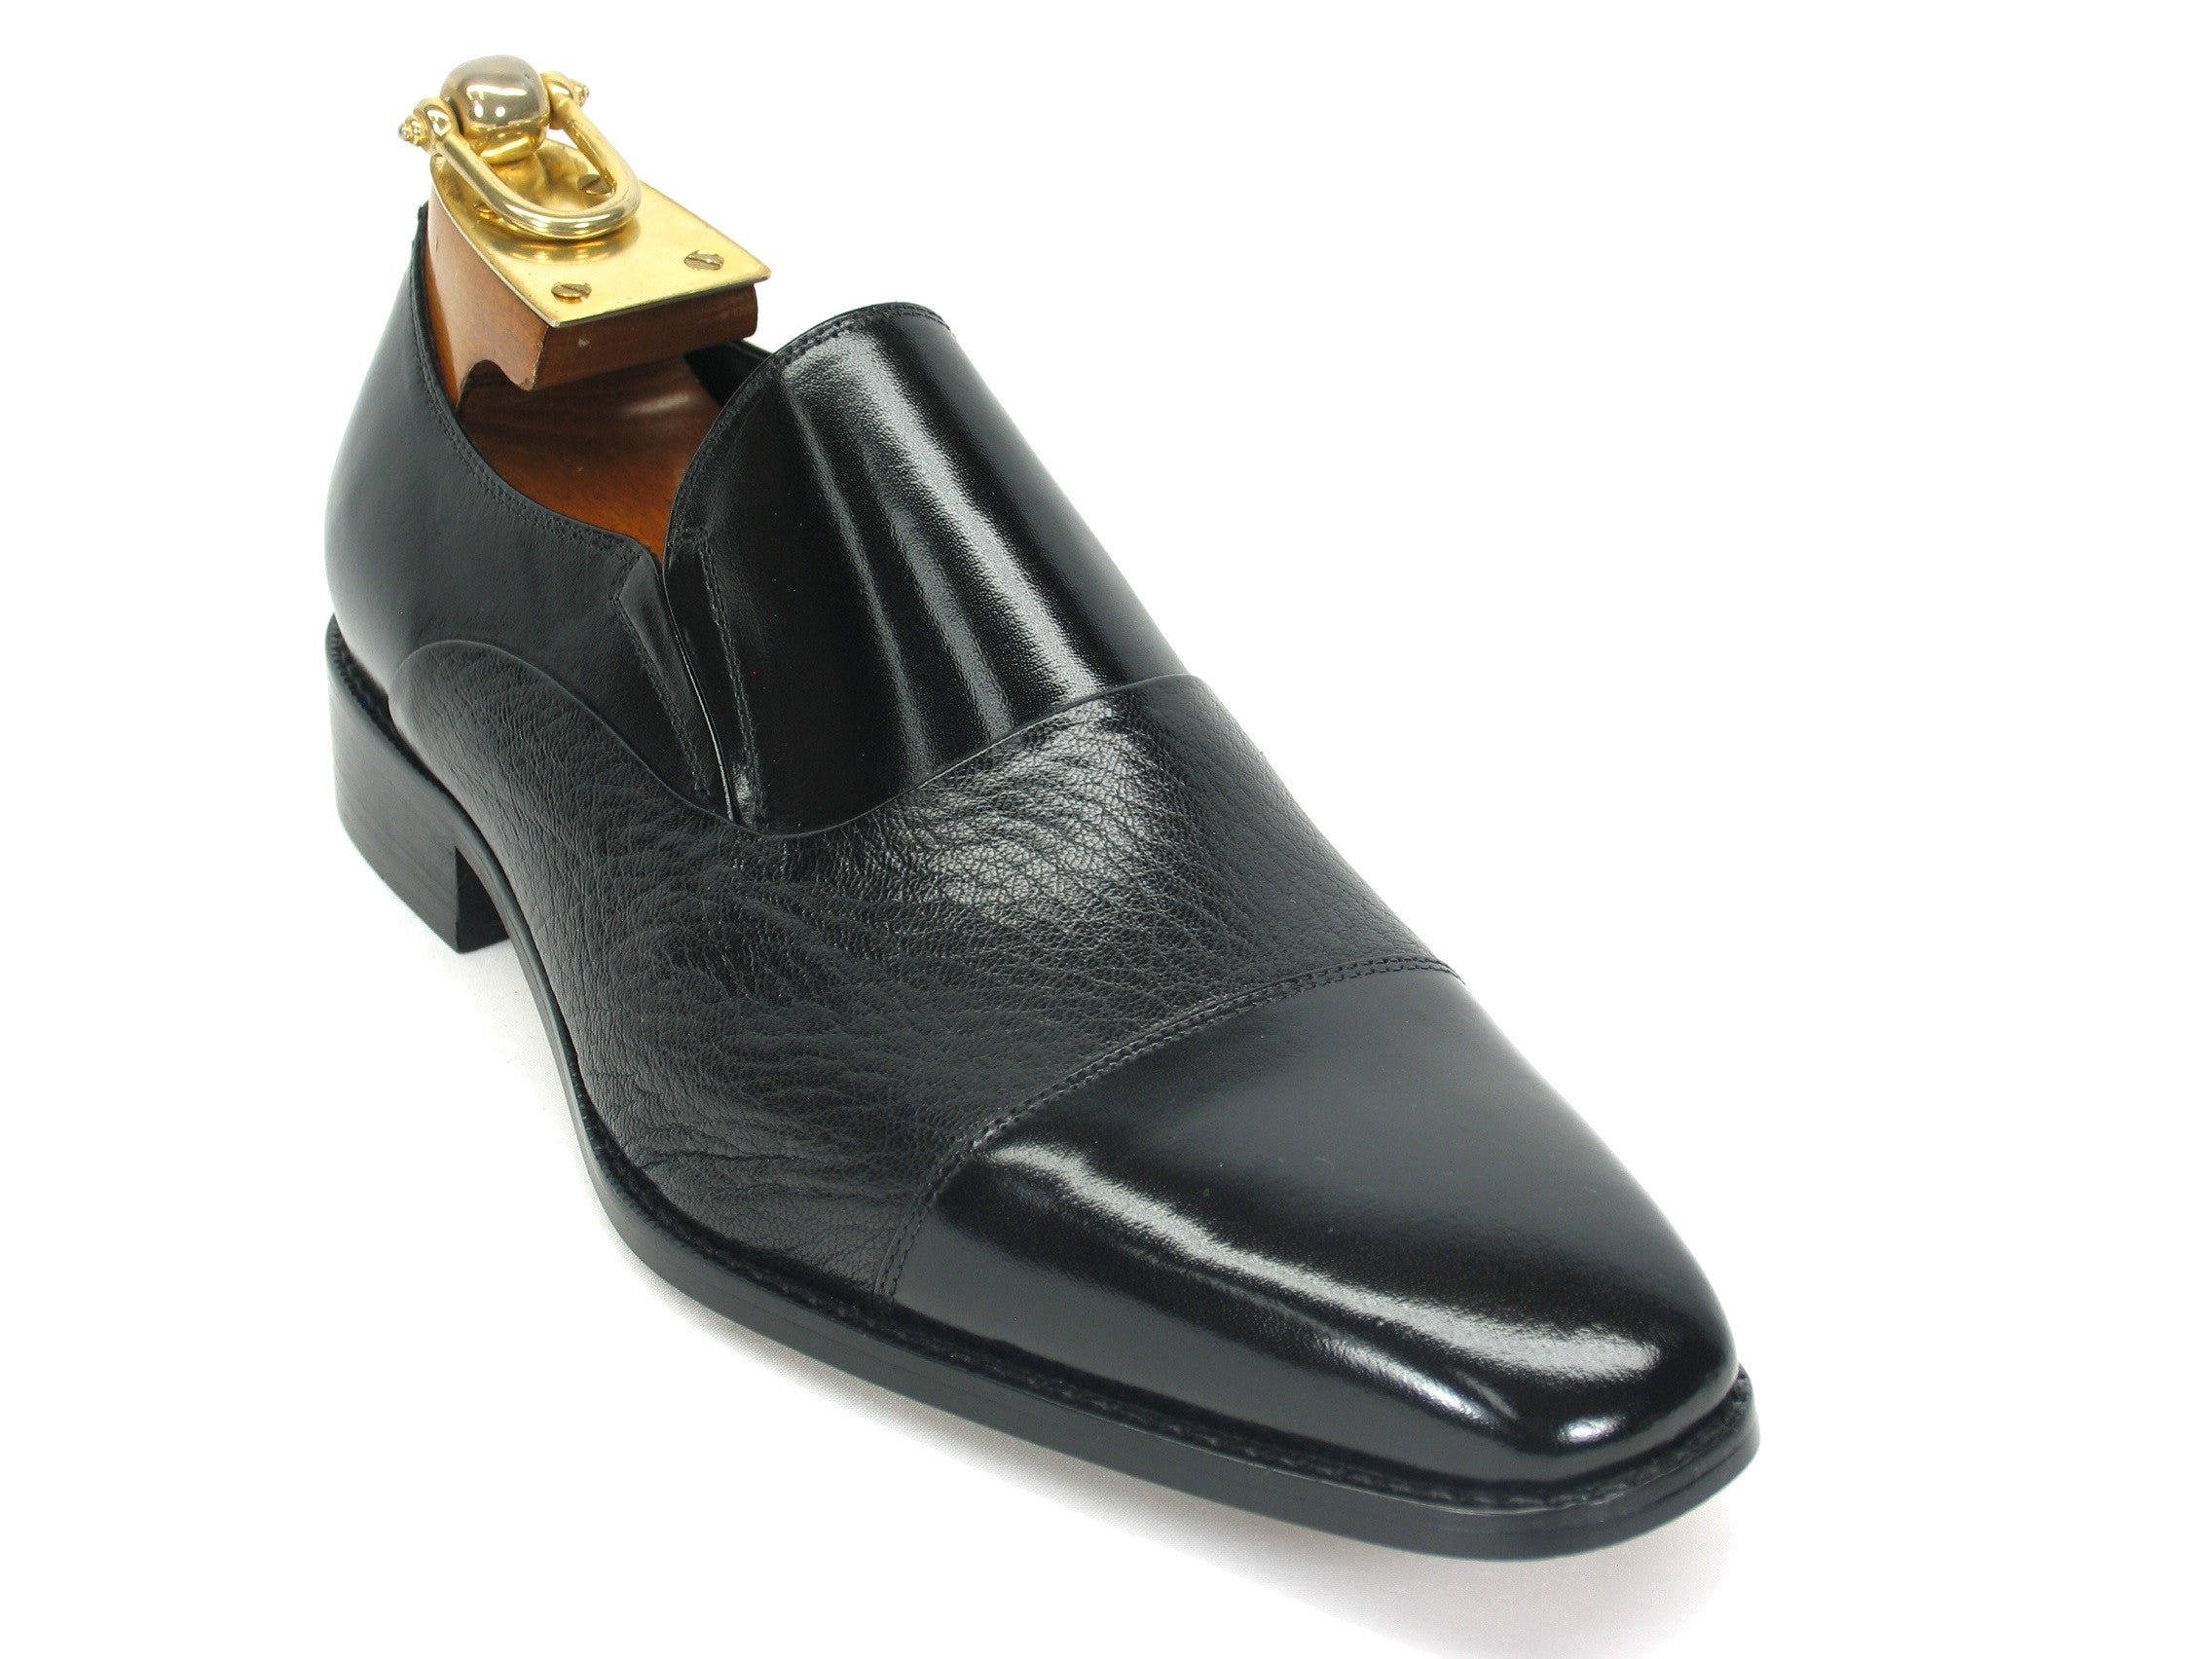 Deerskin Patent Leather Loafer